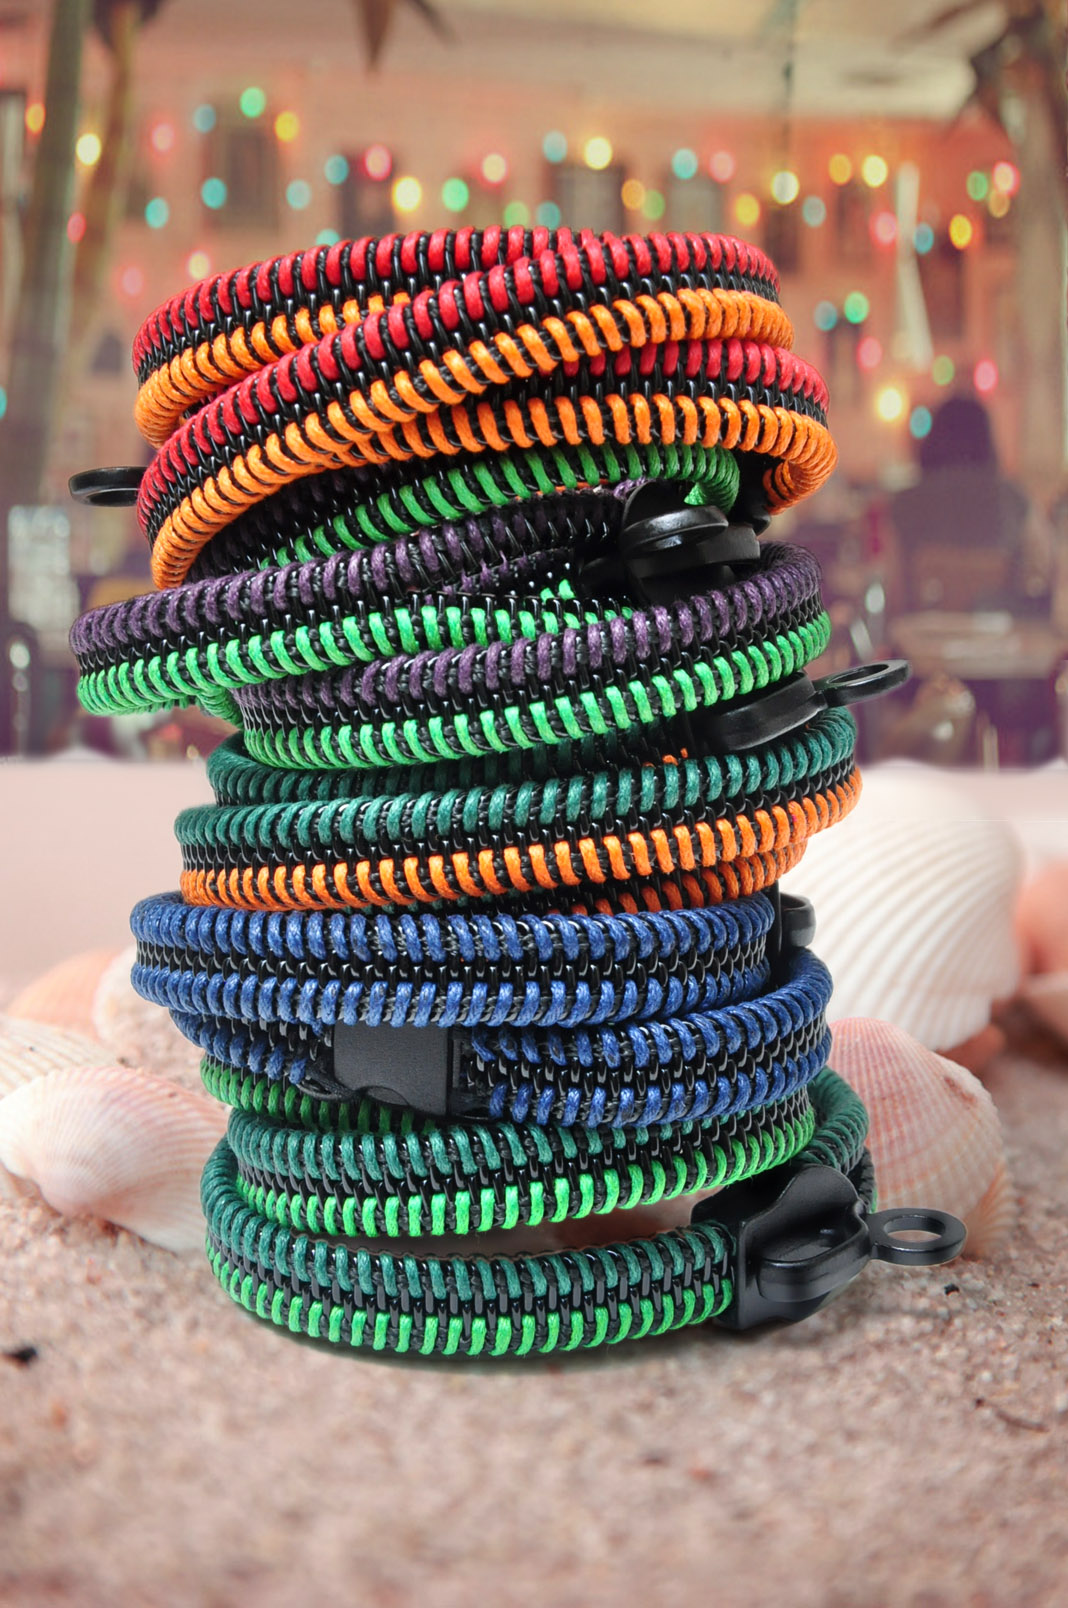 2 Colorful Bracelets, Zipper Jewelry, Metal Steampunk Style Bracelets - Party By The Bay Collection.